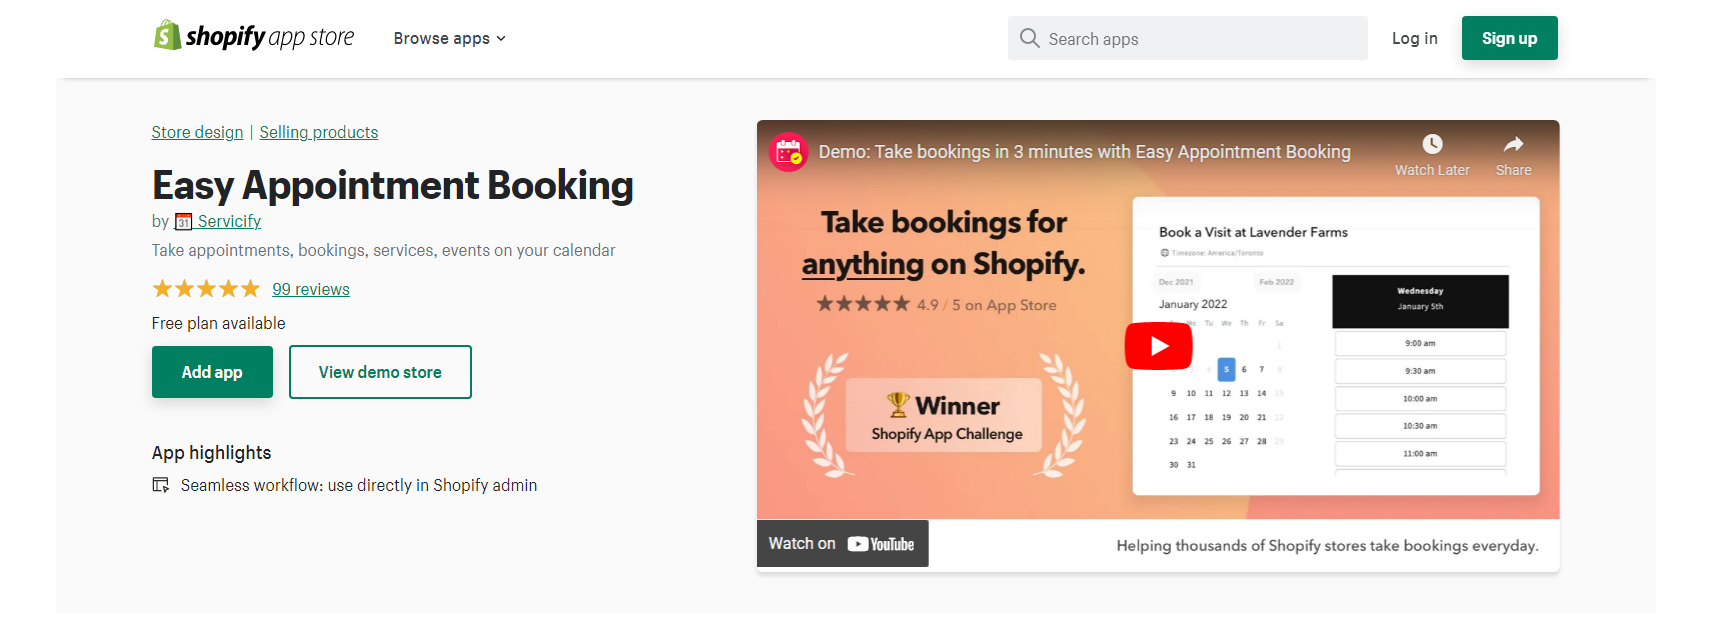 Easy Appointment Booking - Shopify booking system